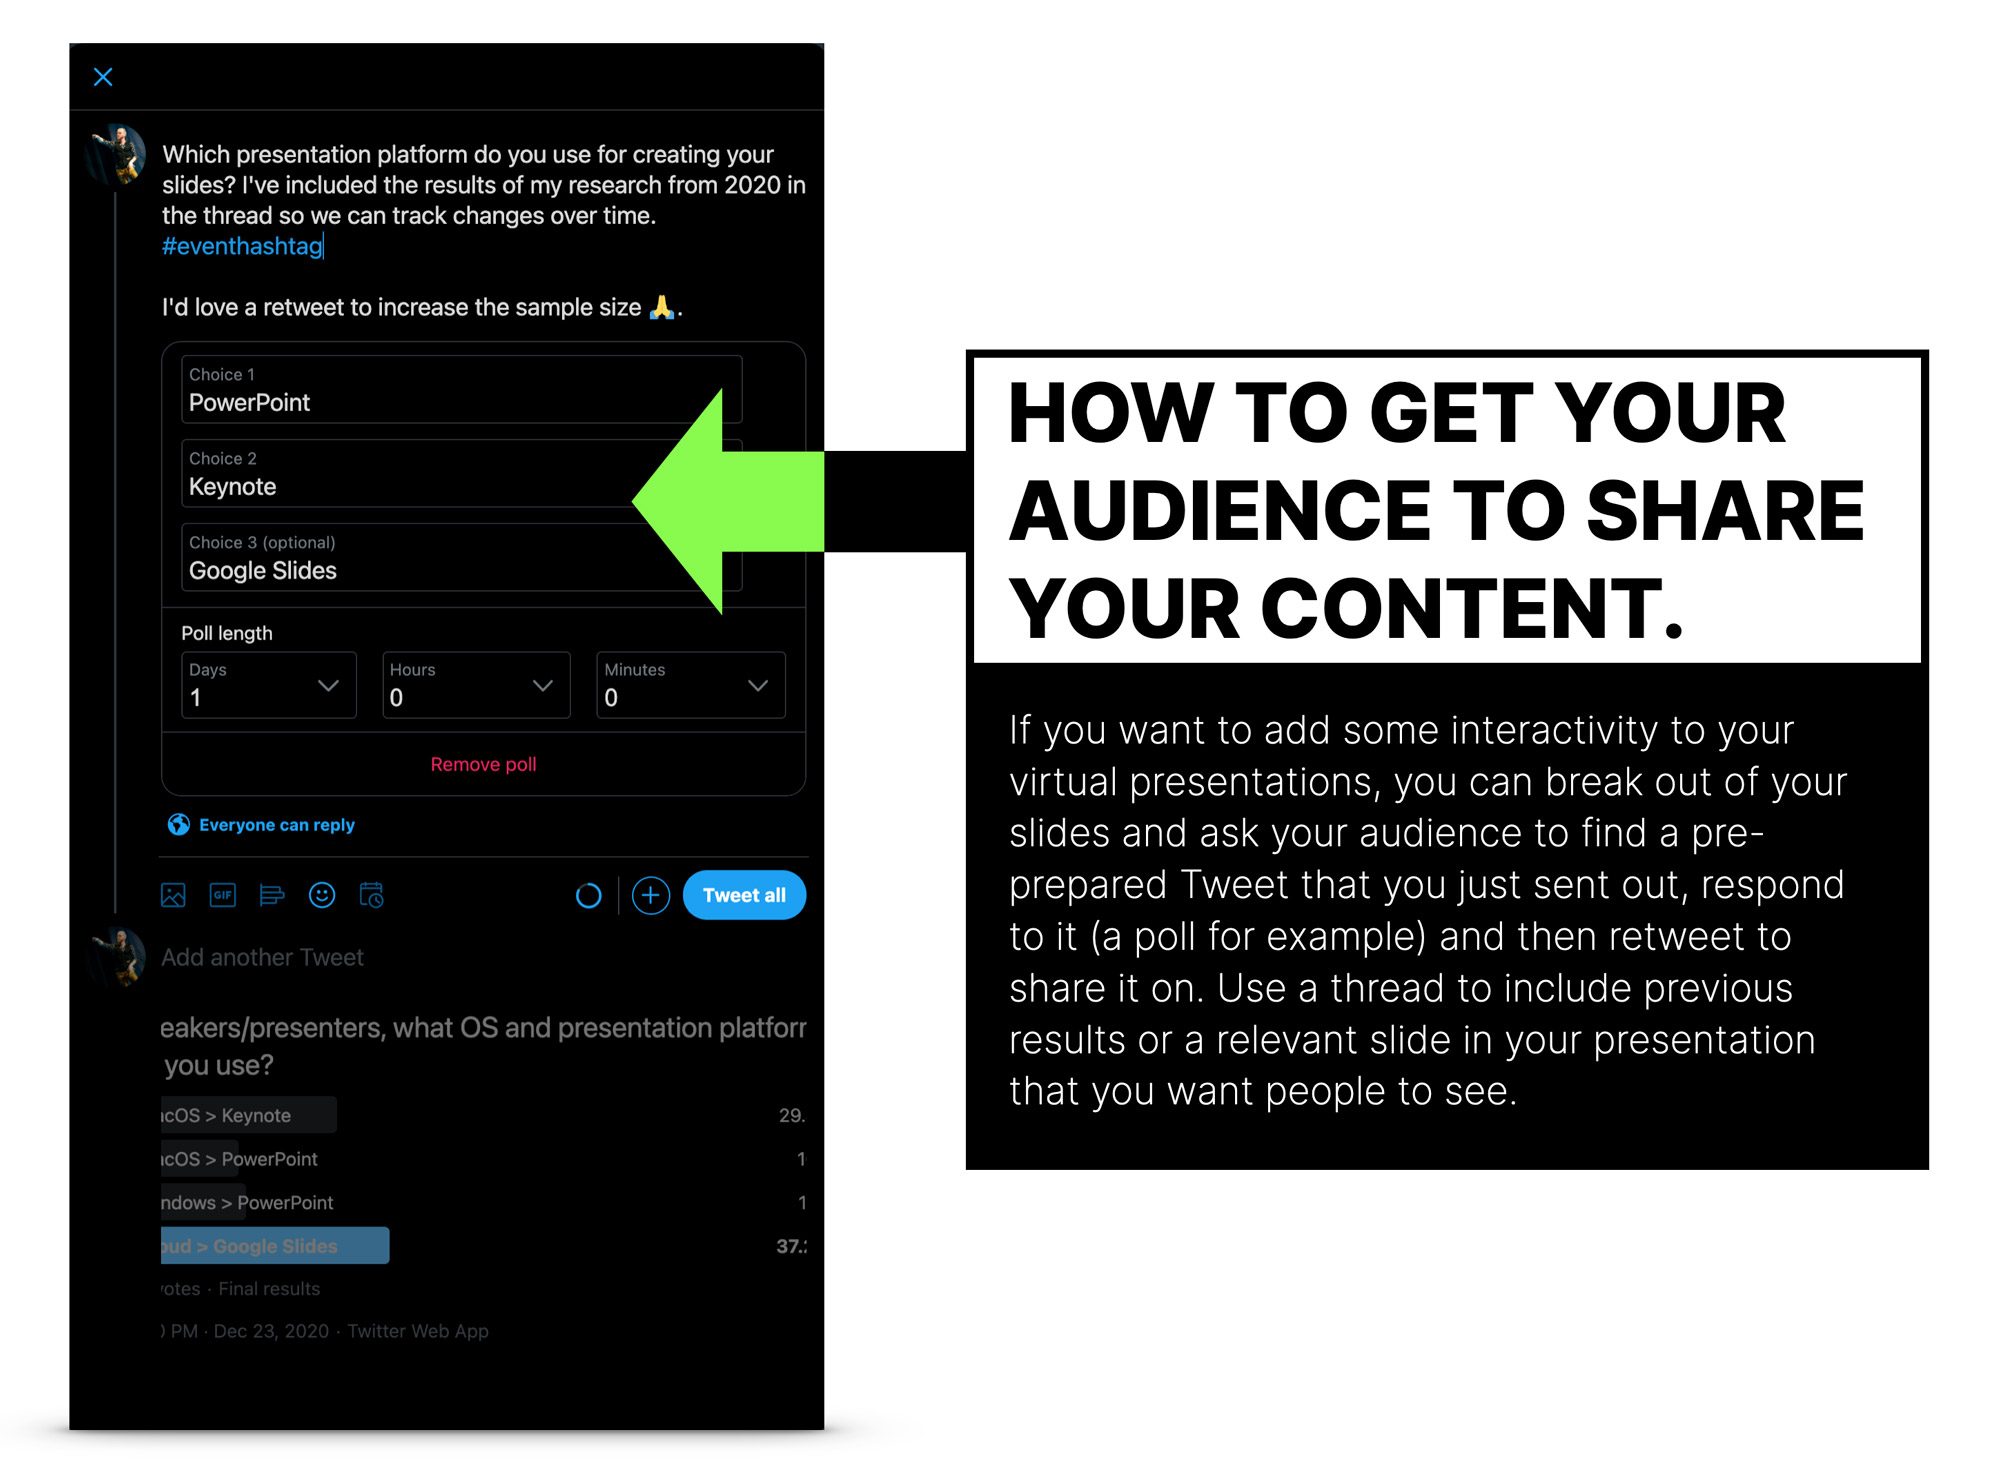 How to get your audience to share your content on Twitter during a virtual presentation